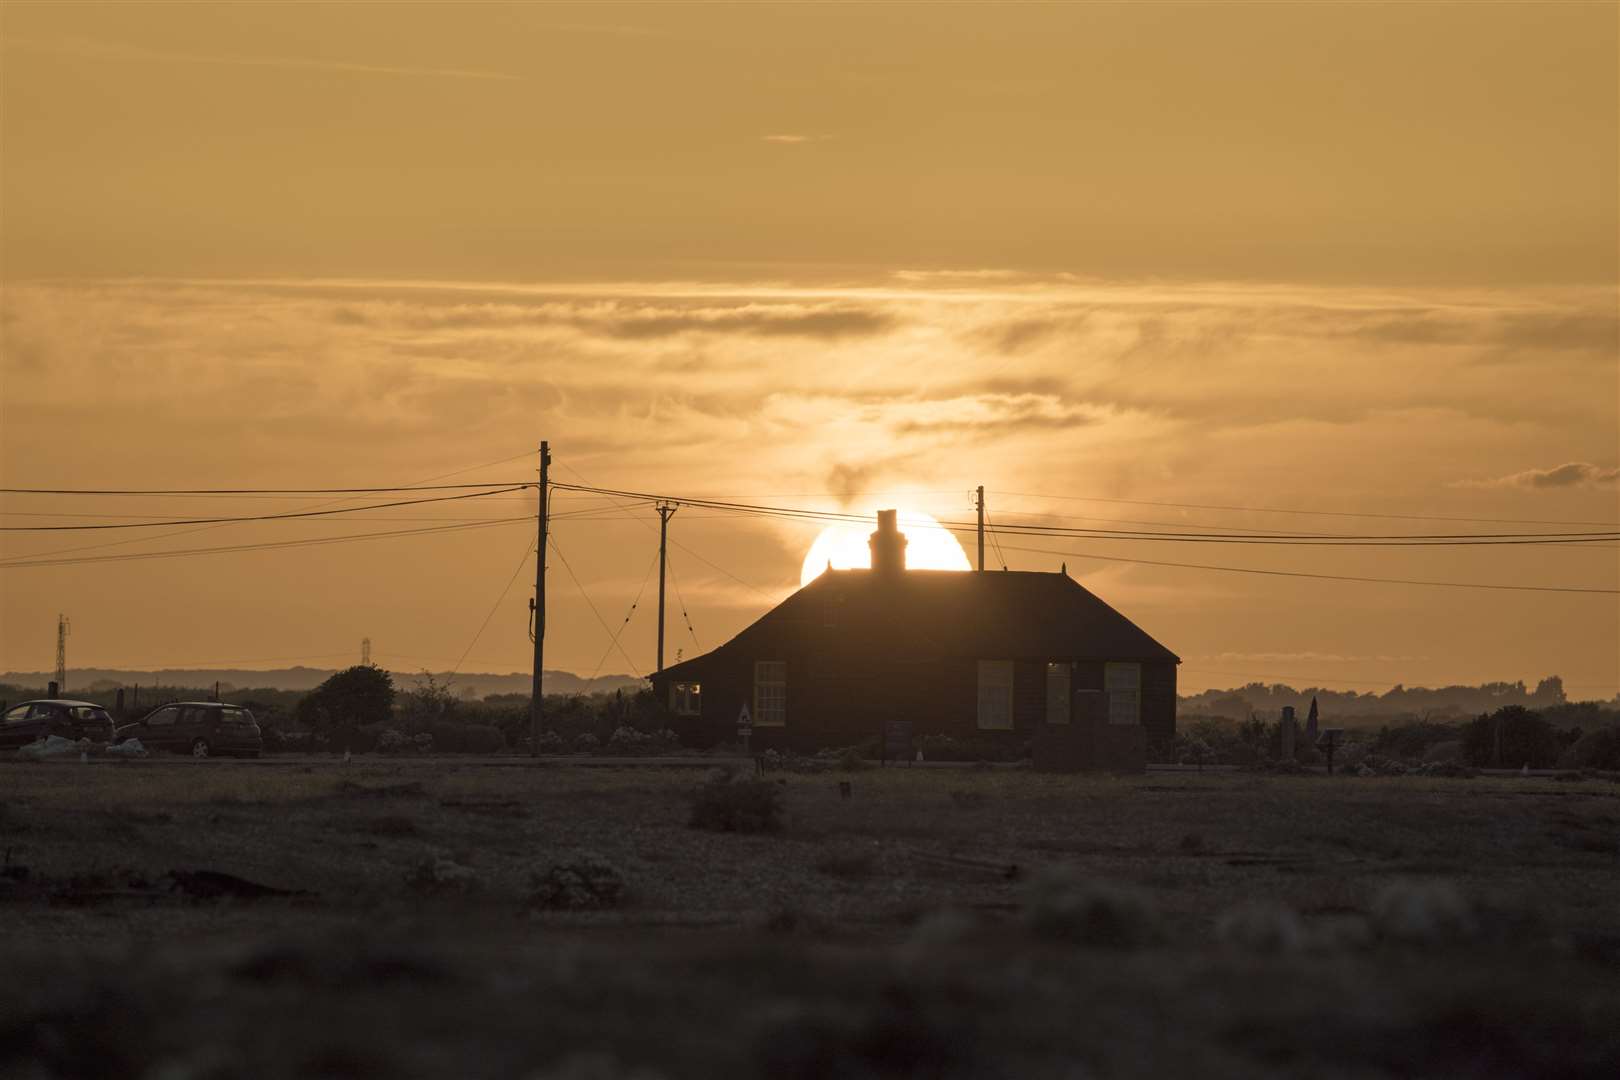 One of the scenes Chris captured at Dungeness